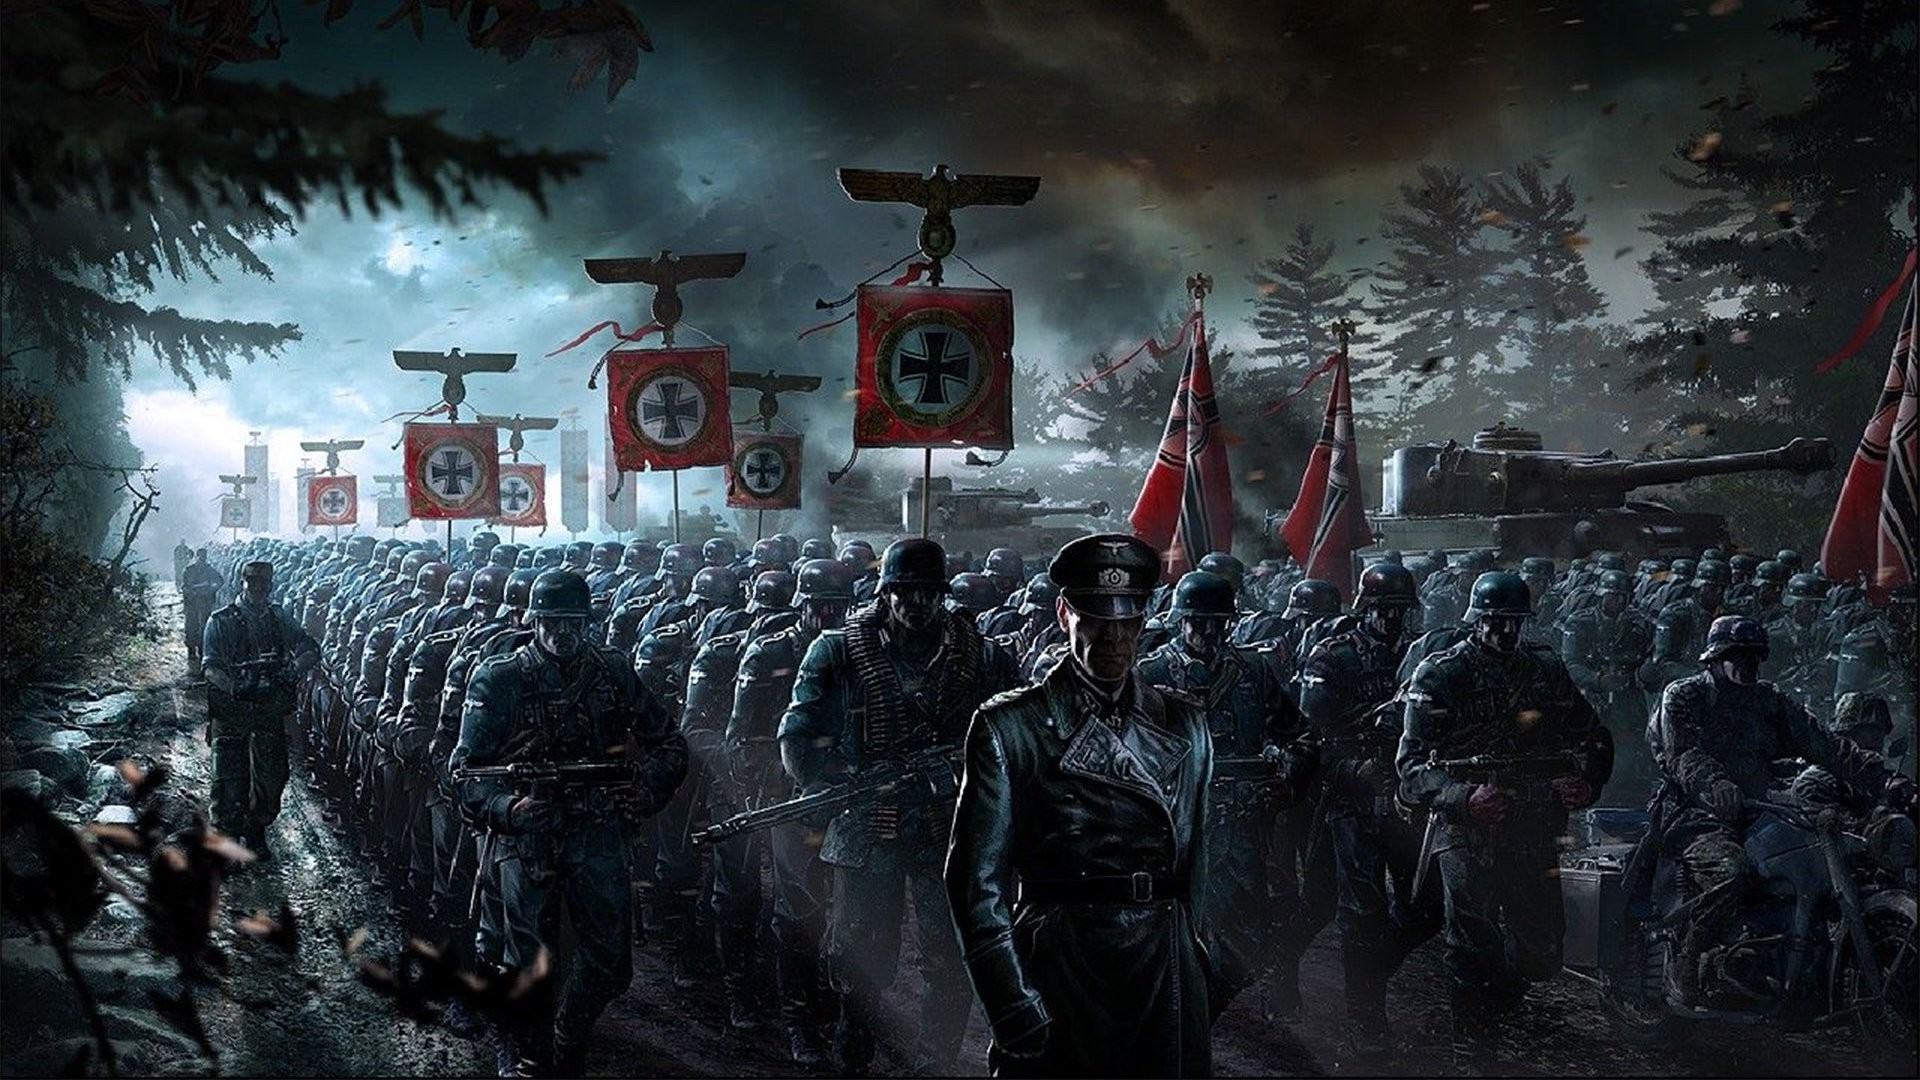 Nazi HD Wallpapers - Free Desktop Images and Photos